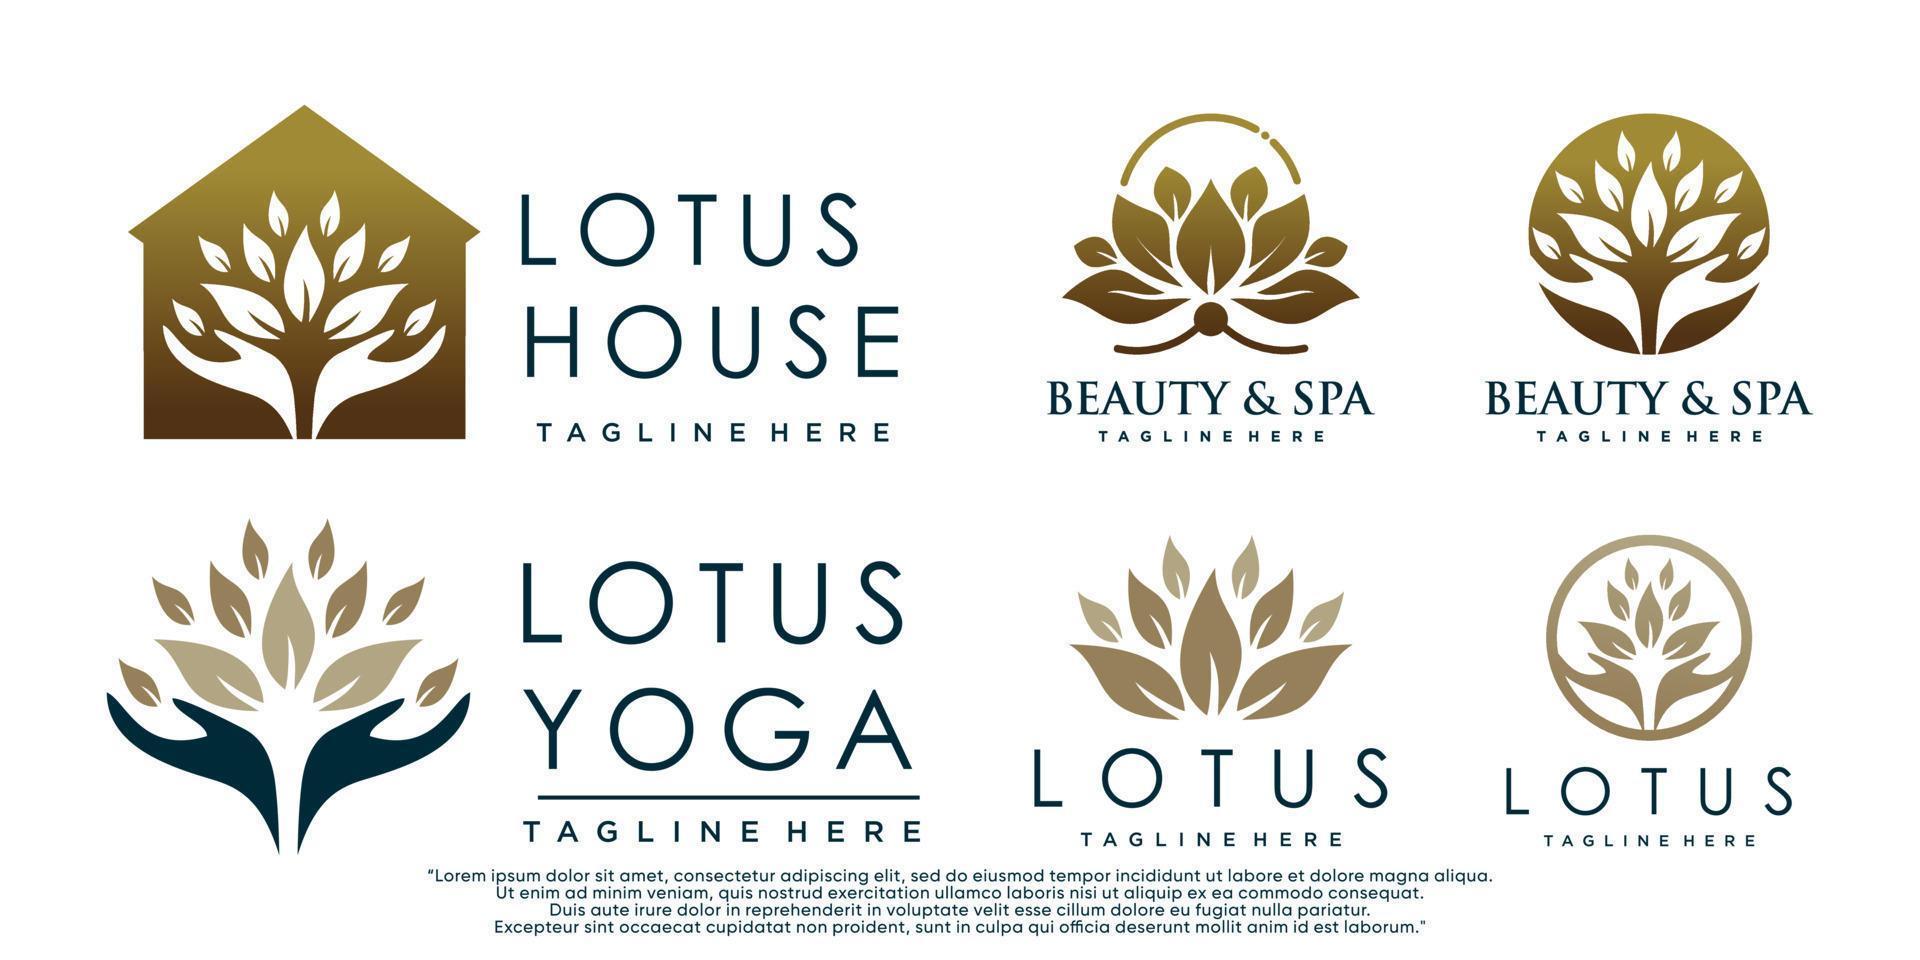 Set of lotus flower logo design with house icon and leaf element Premium Vector